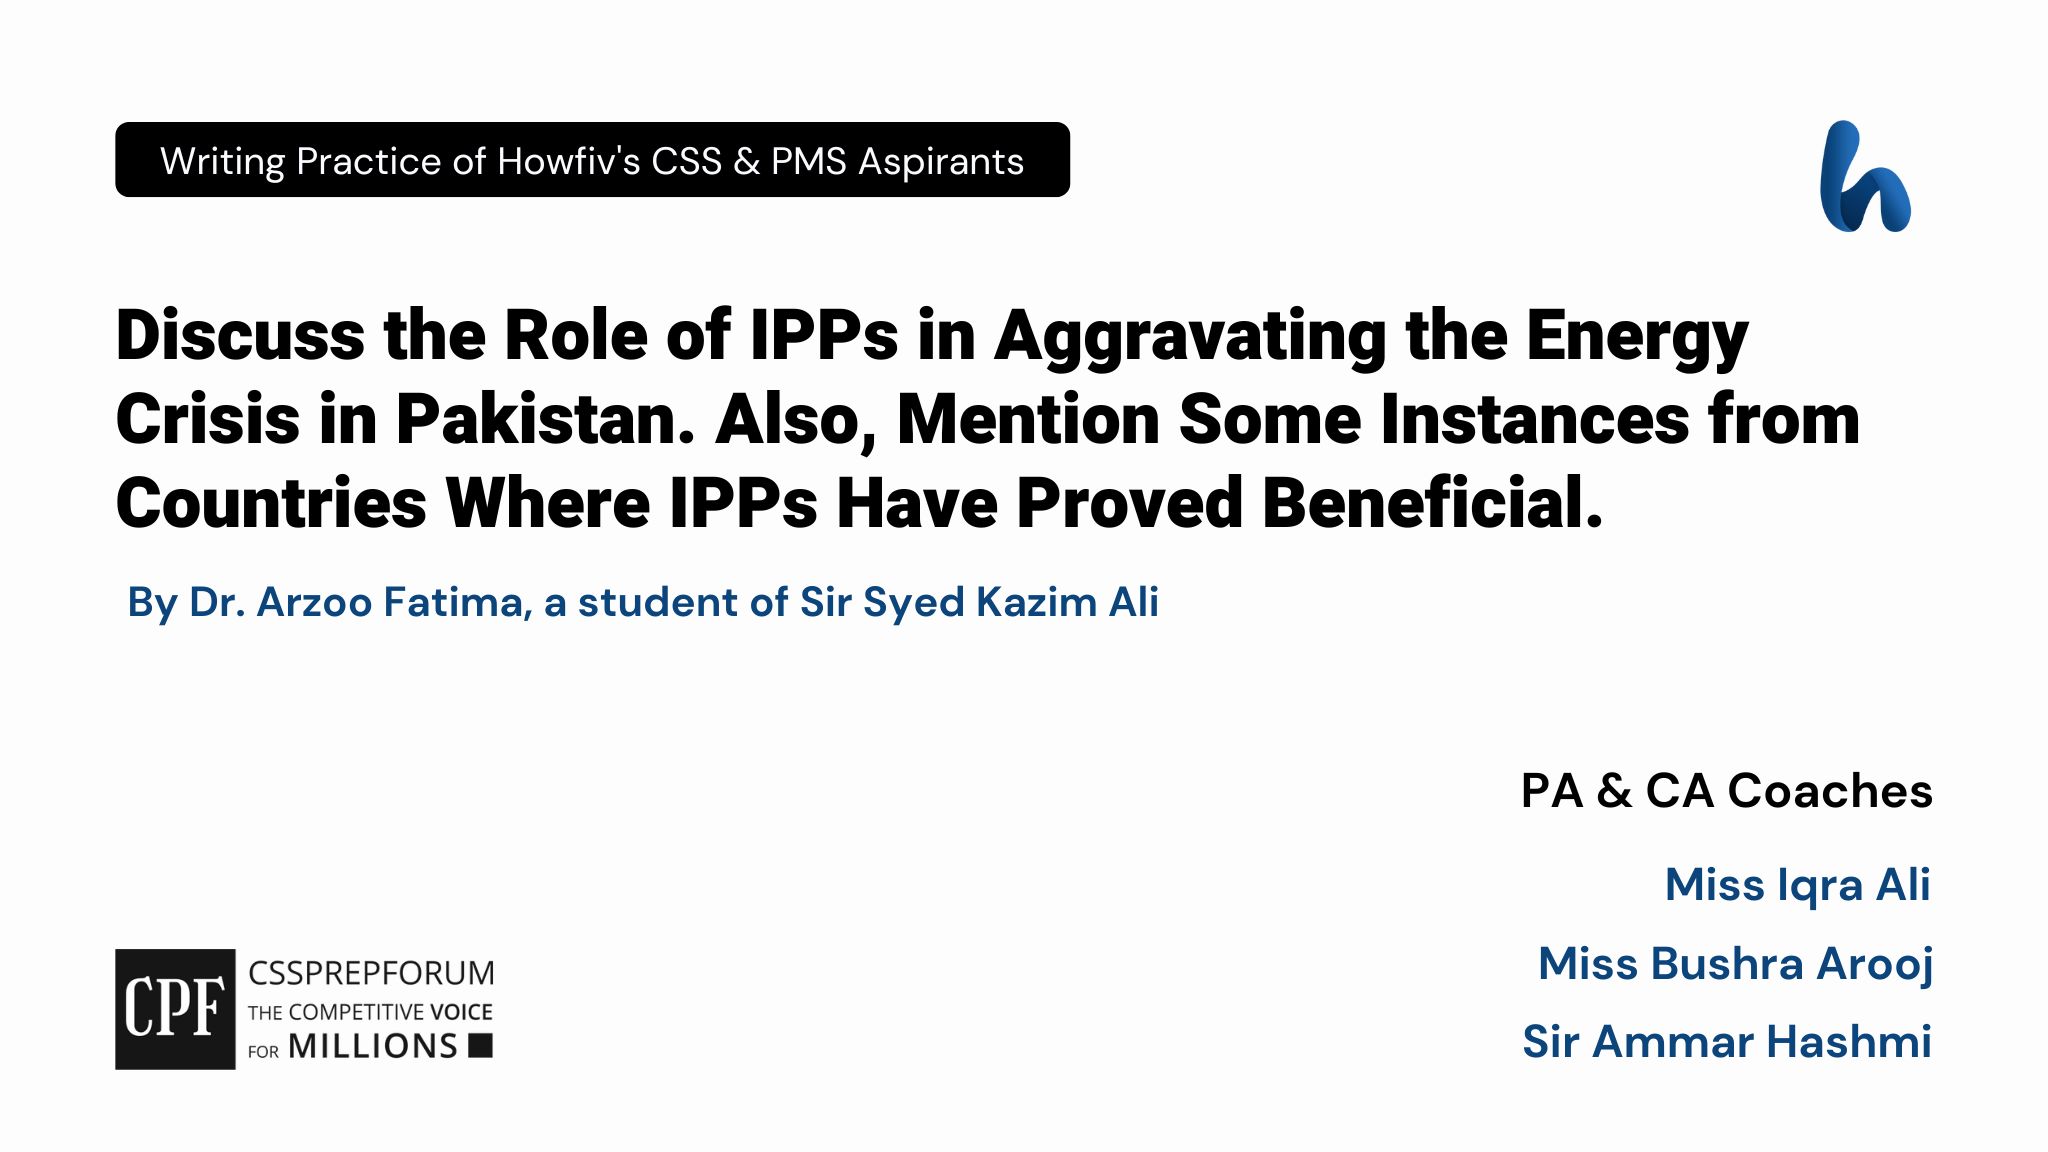 CSS Current Affairs article | Role of IPPs in Aggravating the Energy Crisis | is written by Dr. Arzoo Fatima under the supervision of Sir Ammar Hashmi...